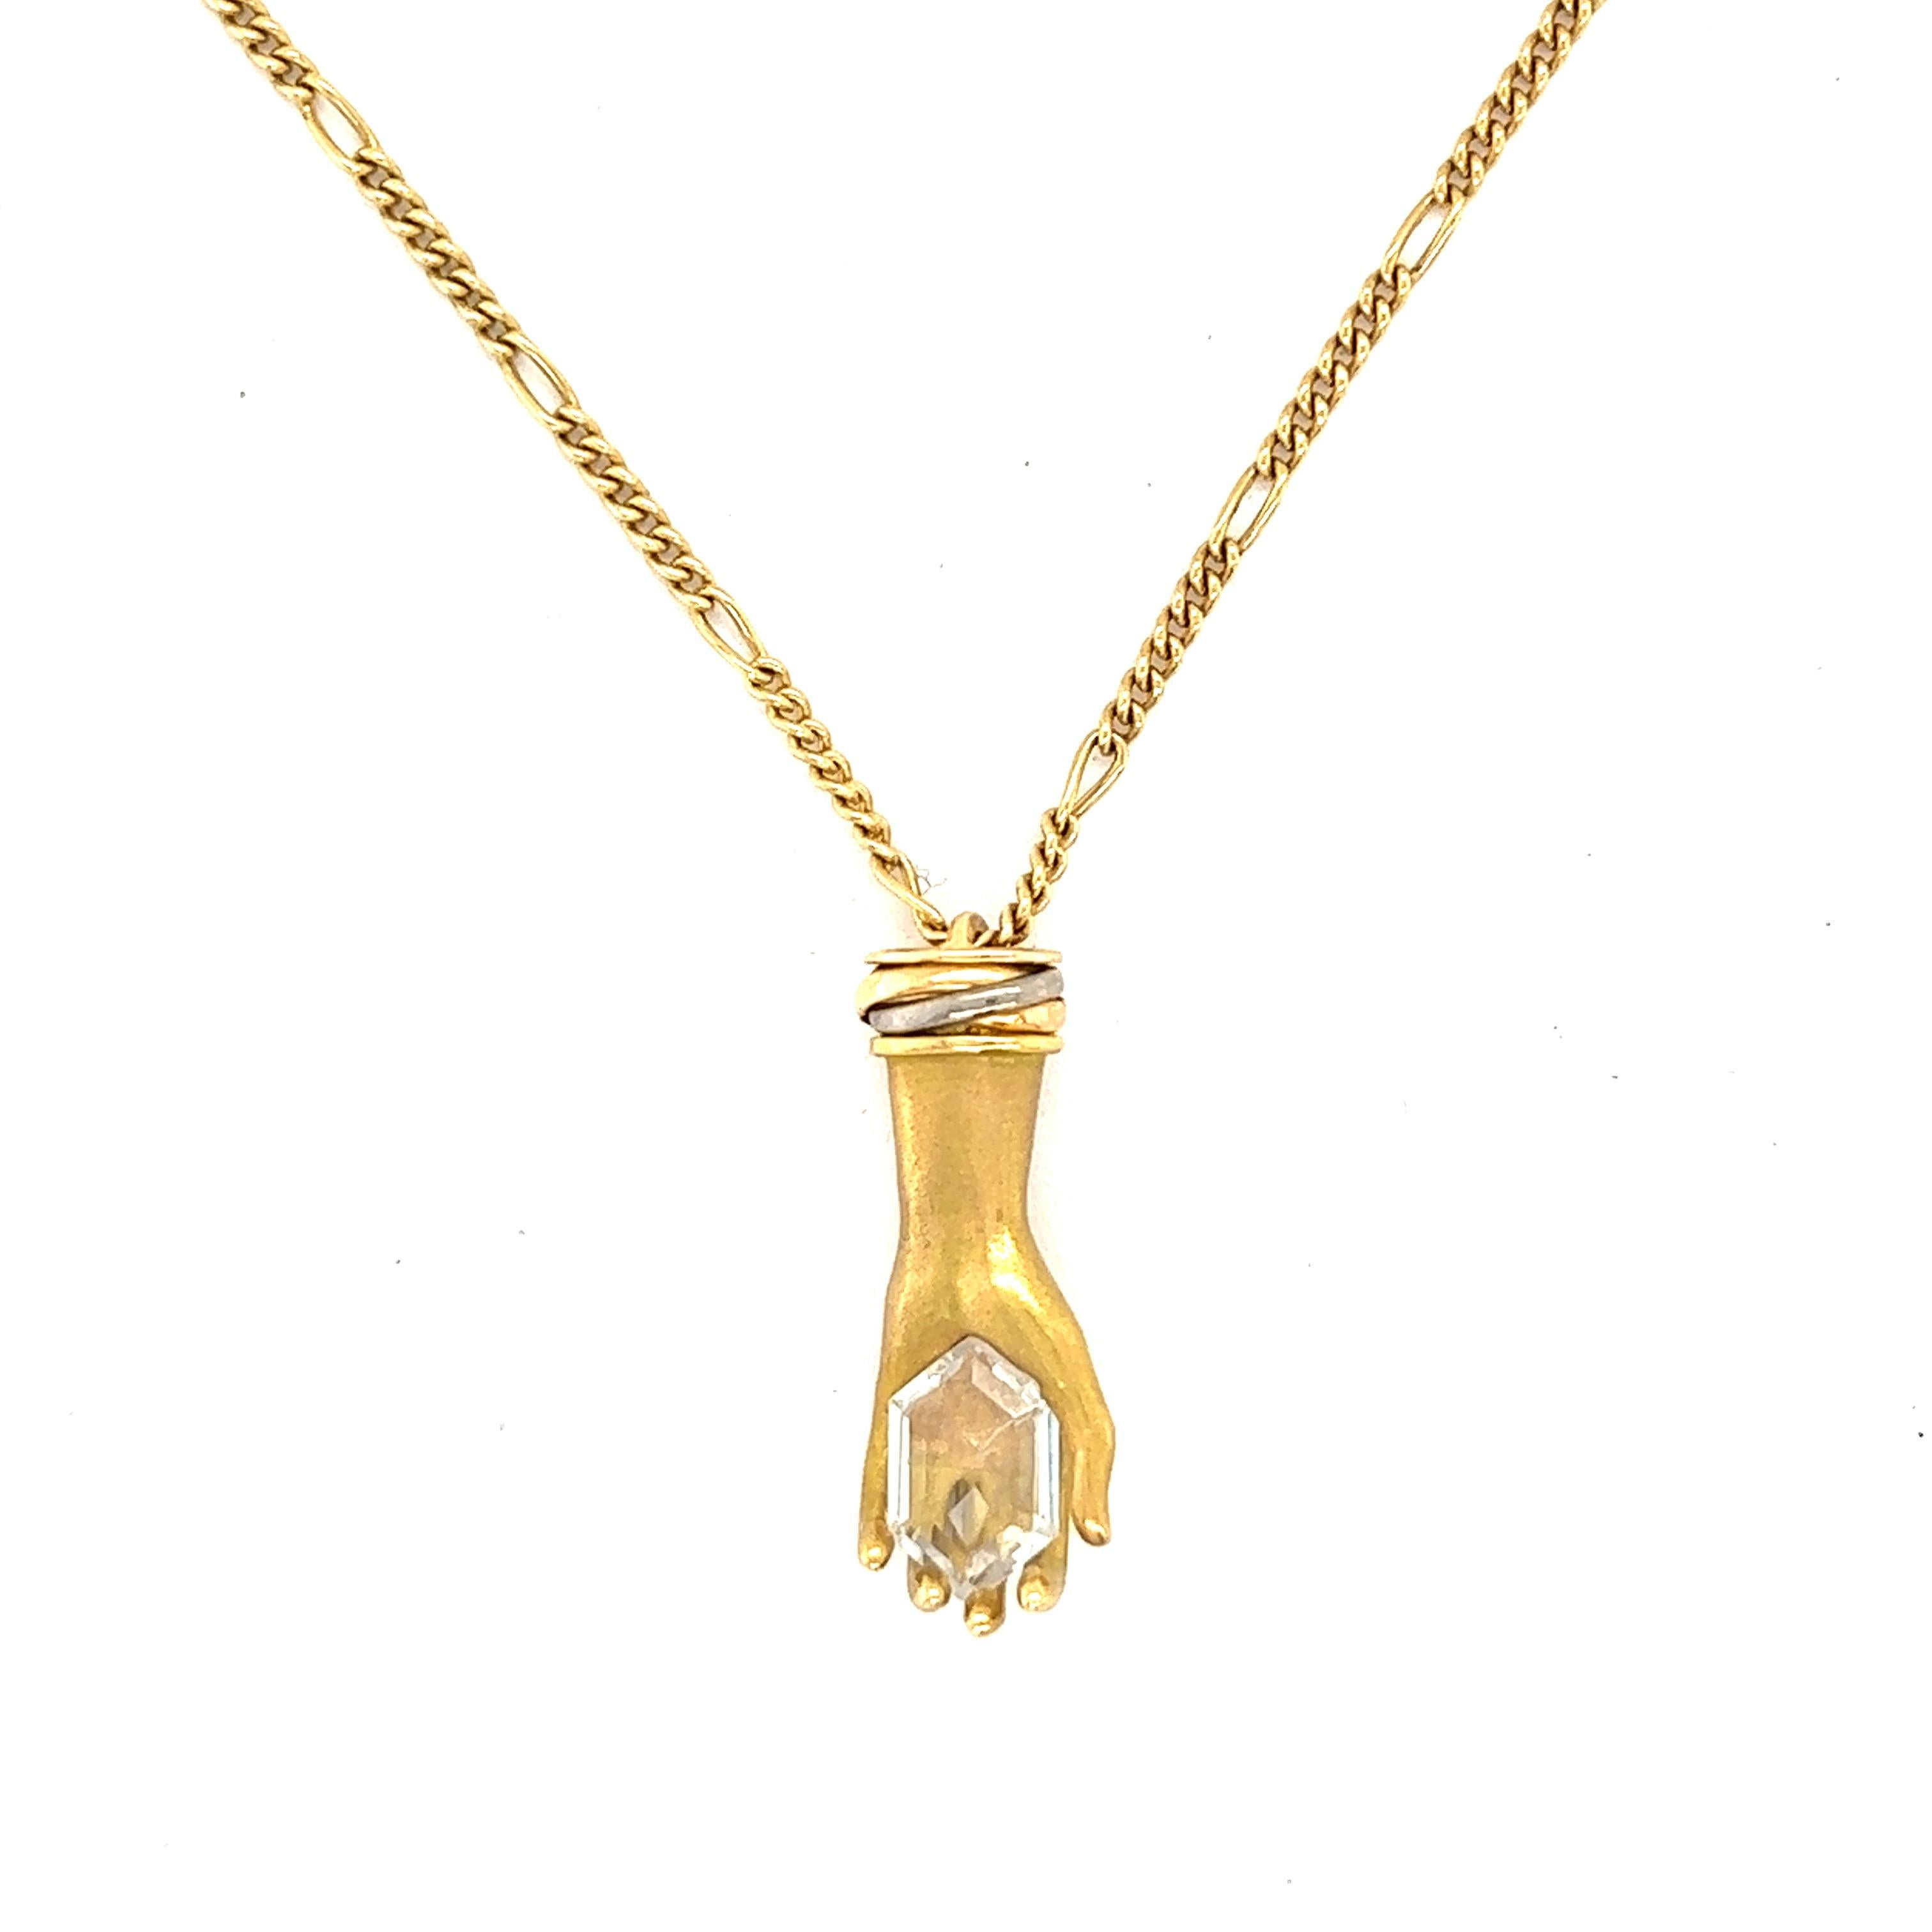 Cartier Hand Pendant Gold Necklace, numbered

A left hand clutching on to a white gemstone; 18 karat yellow gold; marked Cartier, 750, 144692

Size: Pendant width 0.9 cm, length 2.2 cm; chain length 15 inches
Total weight: 8.5 grams